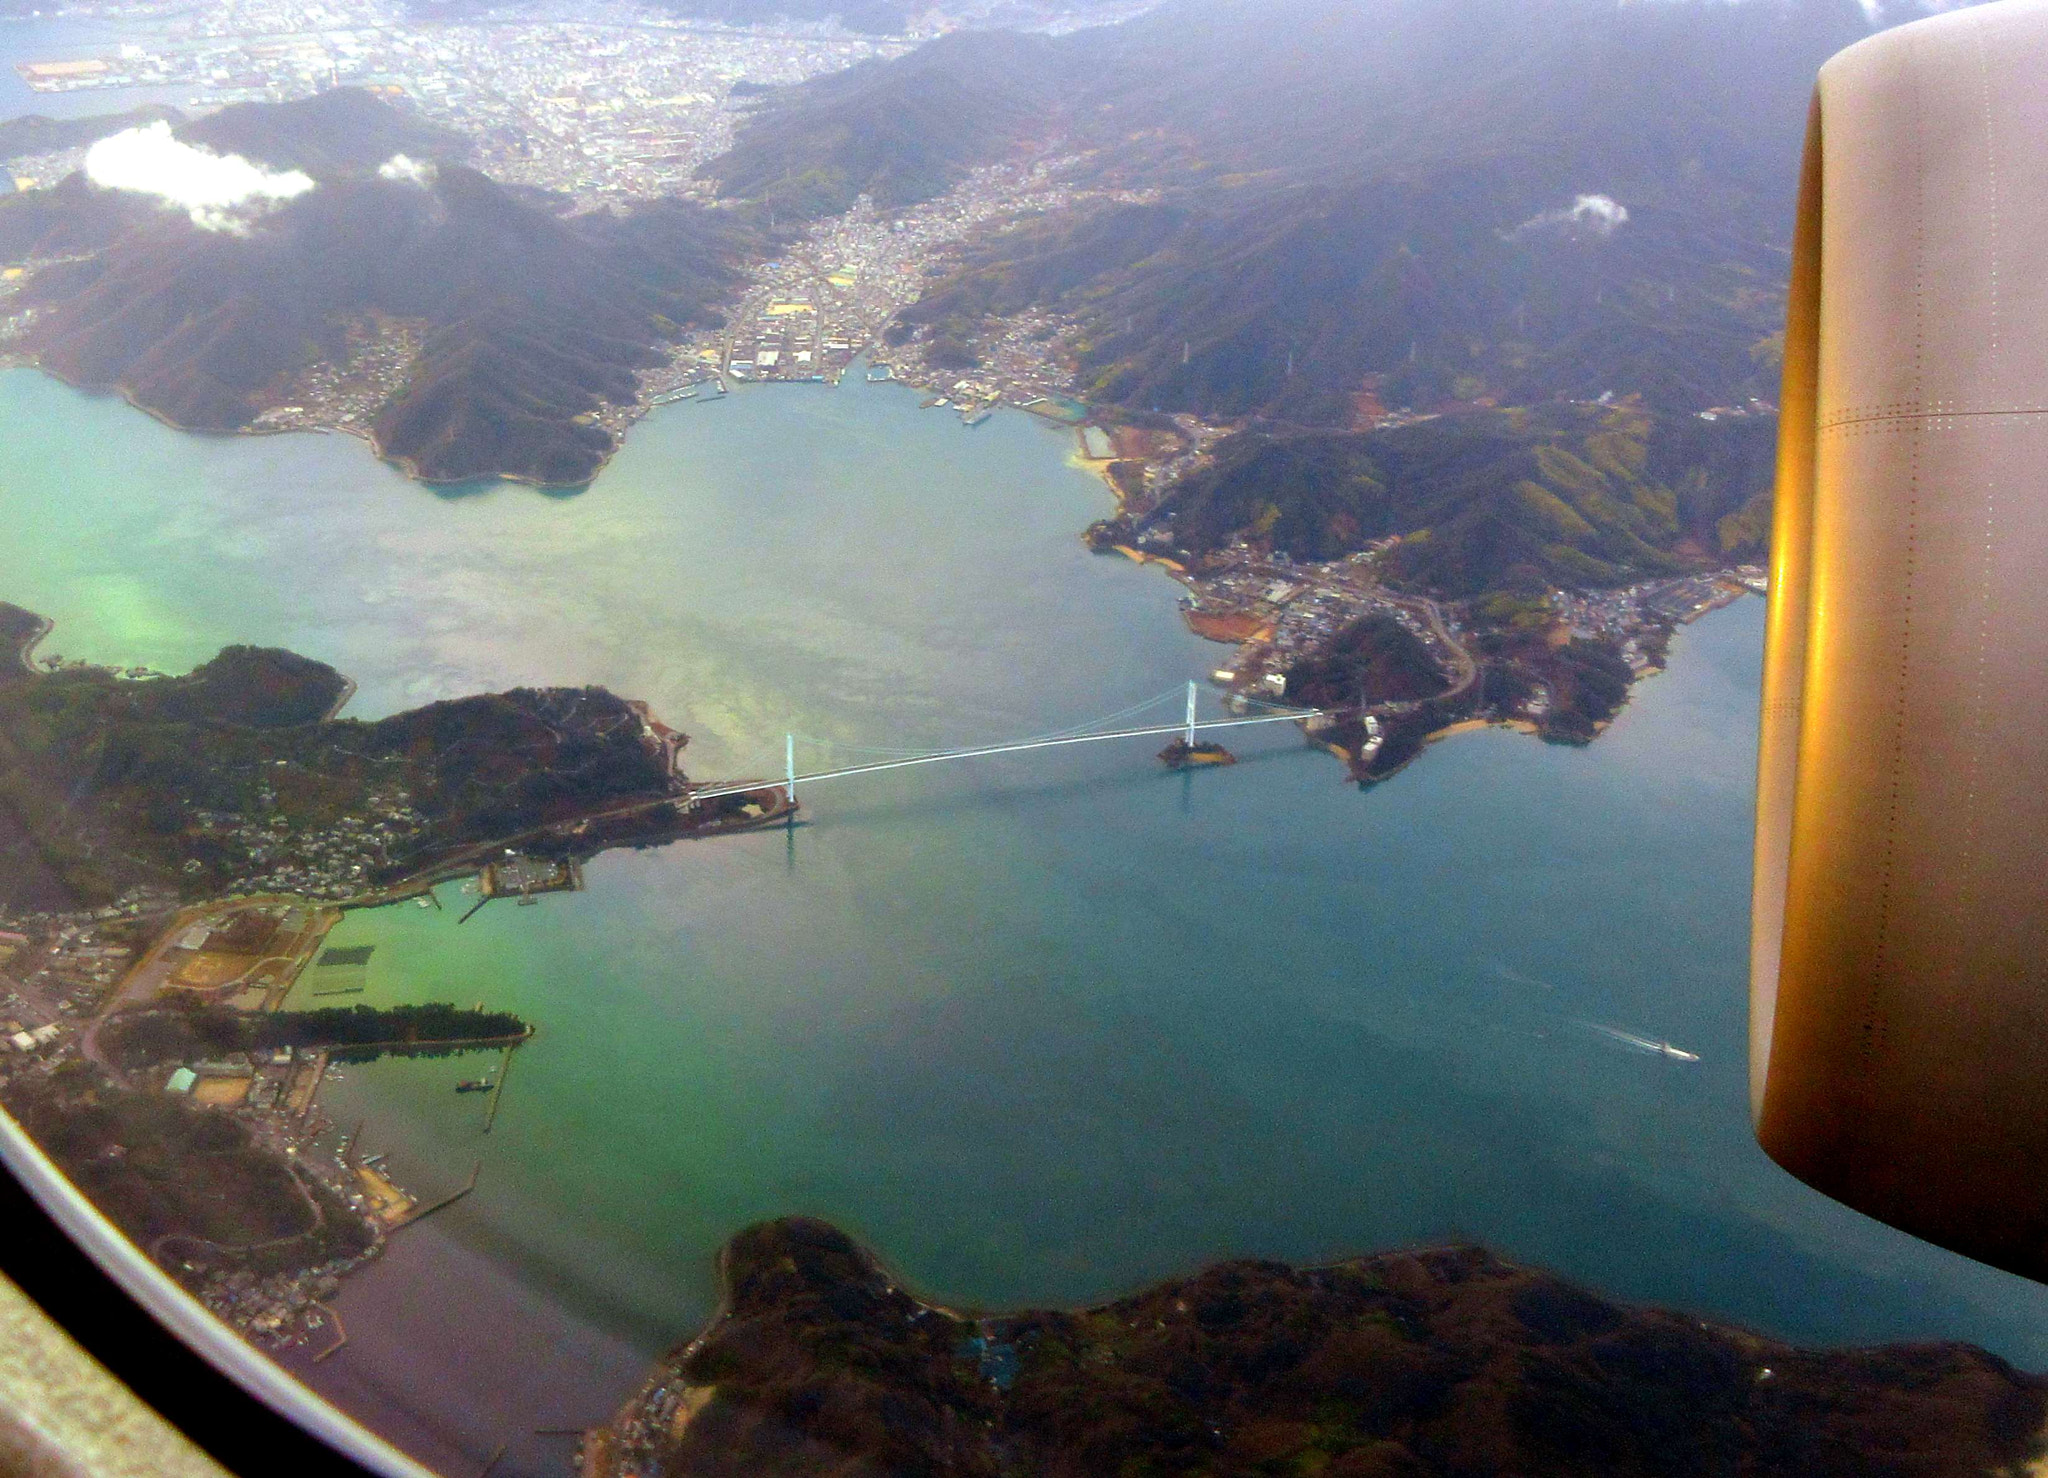 Canon PowerShot ELPH 360 HS (IXUS 285 HS / IXY 650) sample photo. The bridge is visible from the window of an airplane photography